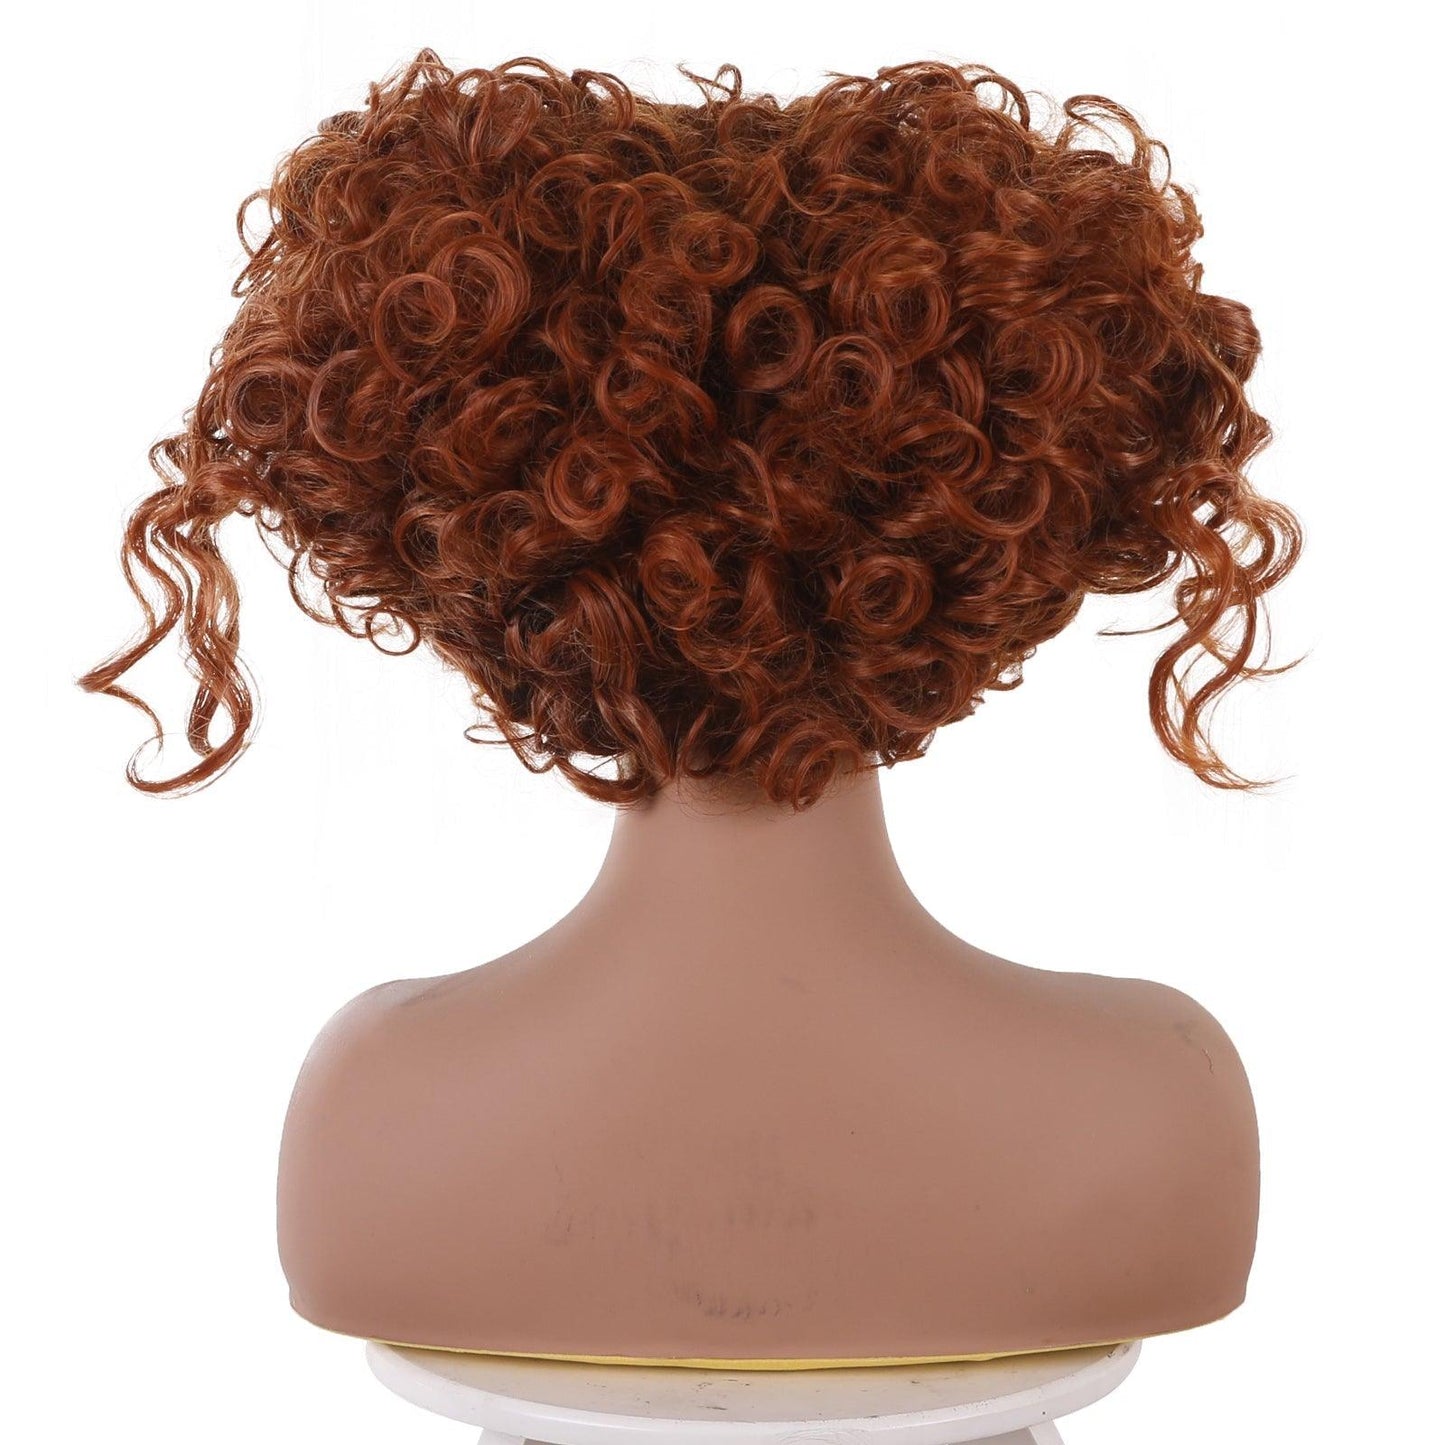 hocus pocus 2 winifred sanderson heart shaped brown movie cosplay wig 405s